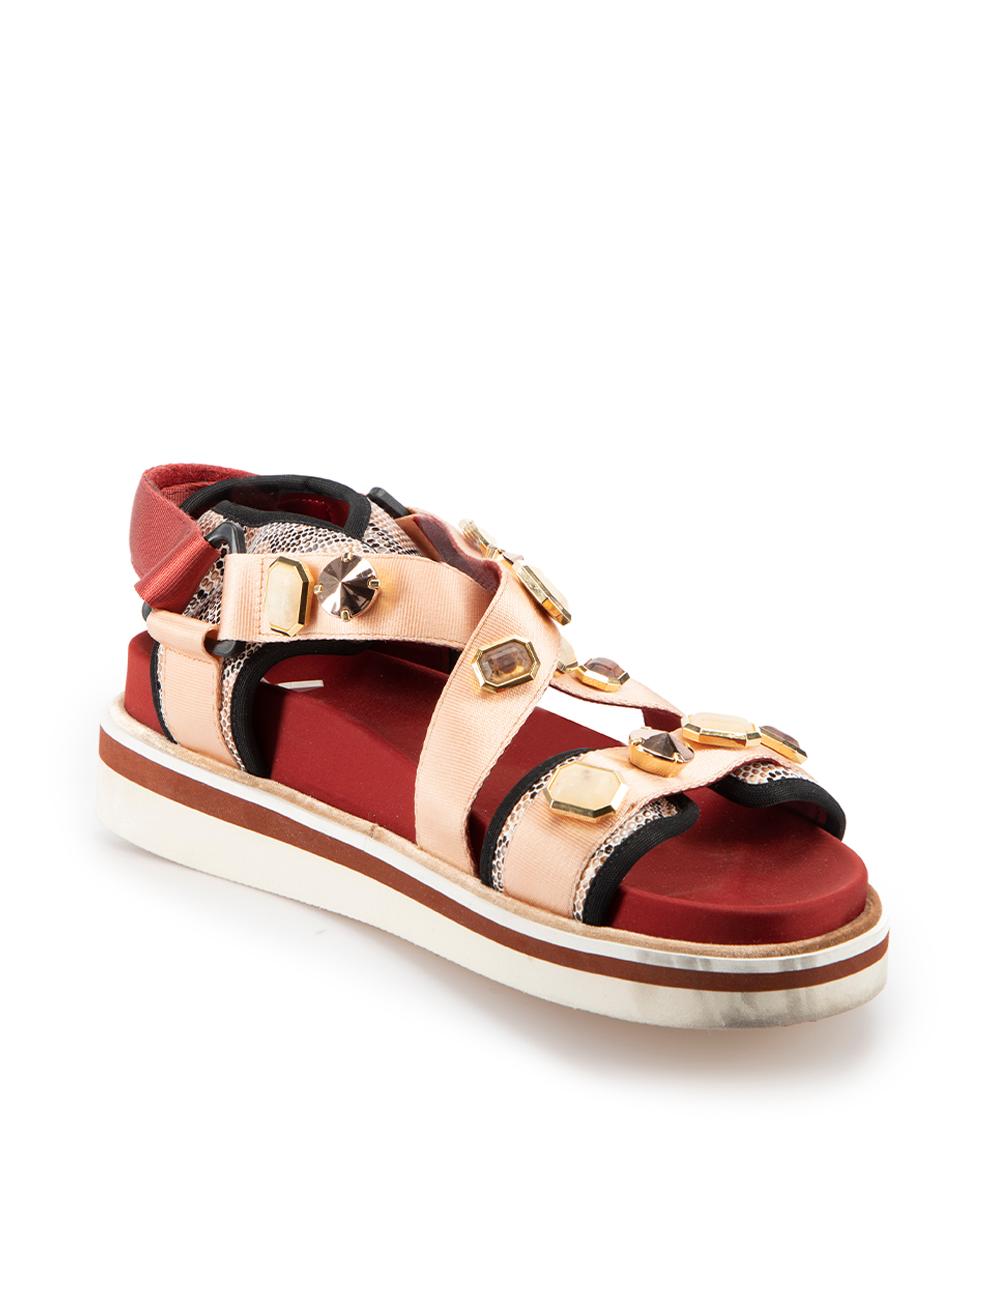 CONDITION is Very good. Minimal wear to sandals is evident. Minimal wear to the right-side of left shoe straps and both shoe soles with light marks on this used See by Chloé designer resale item.



Details


Multicolour- Red with pink